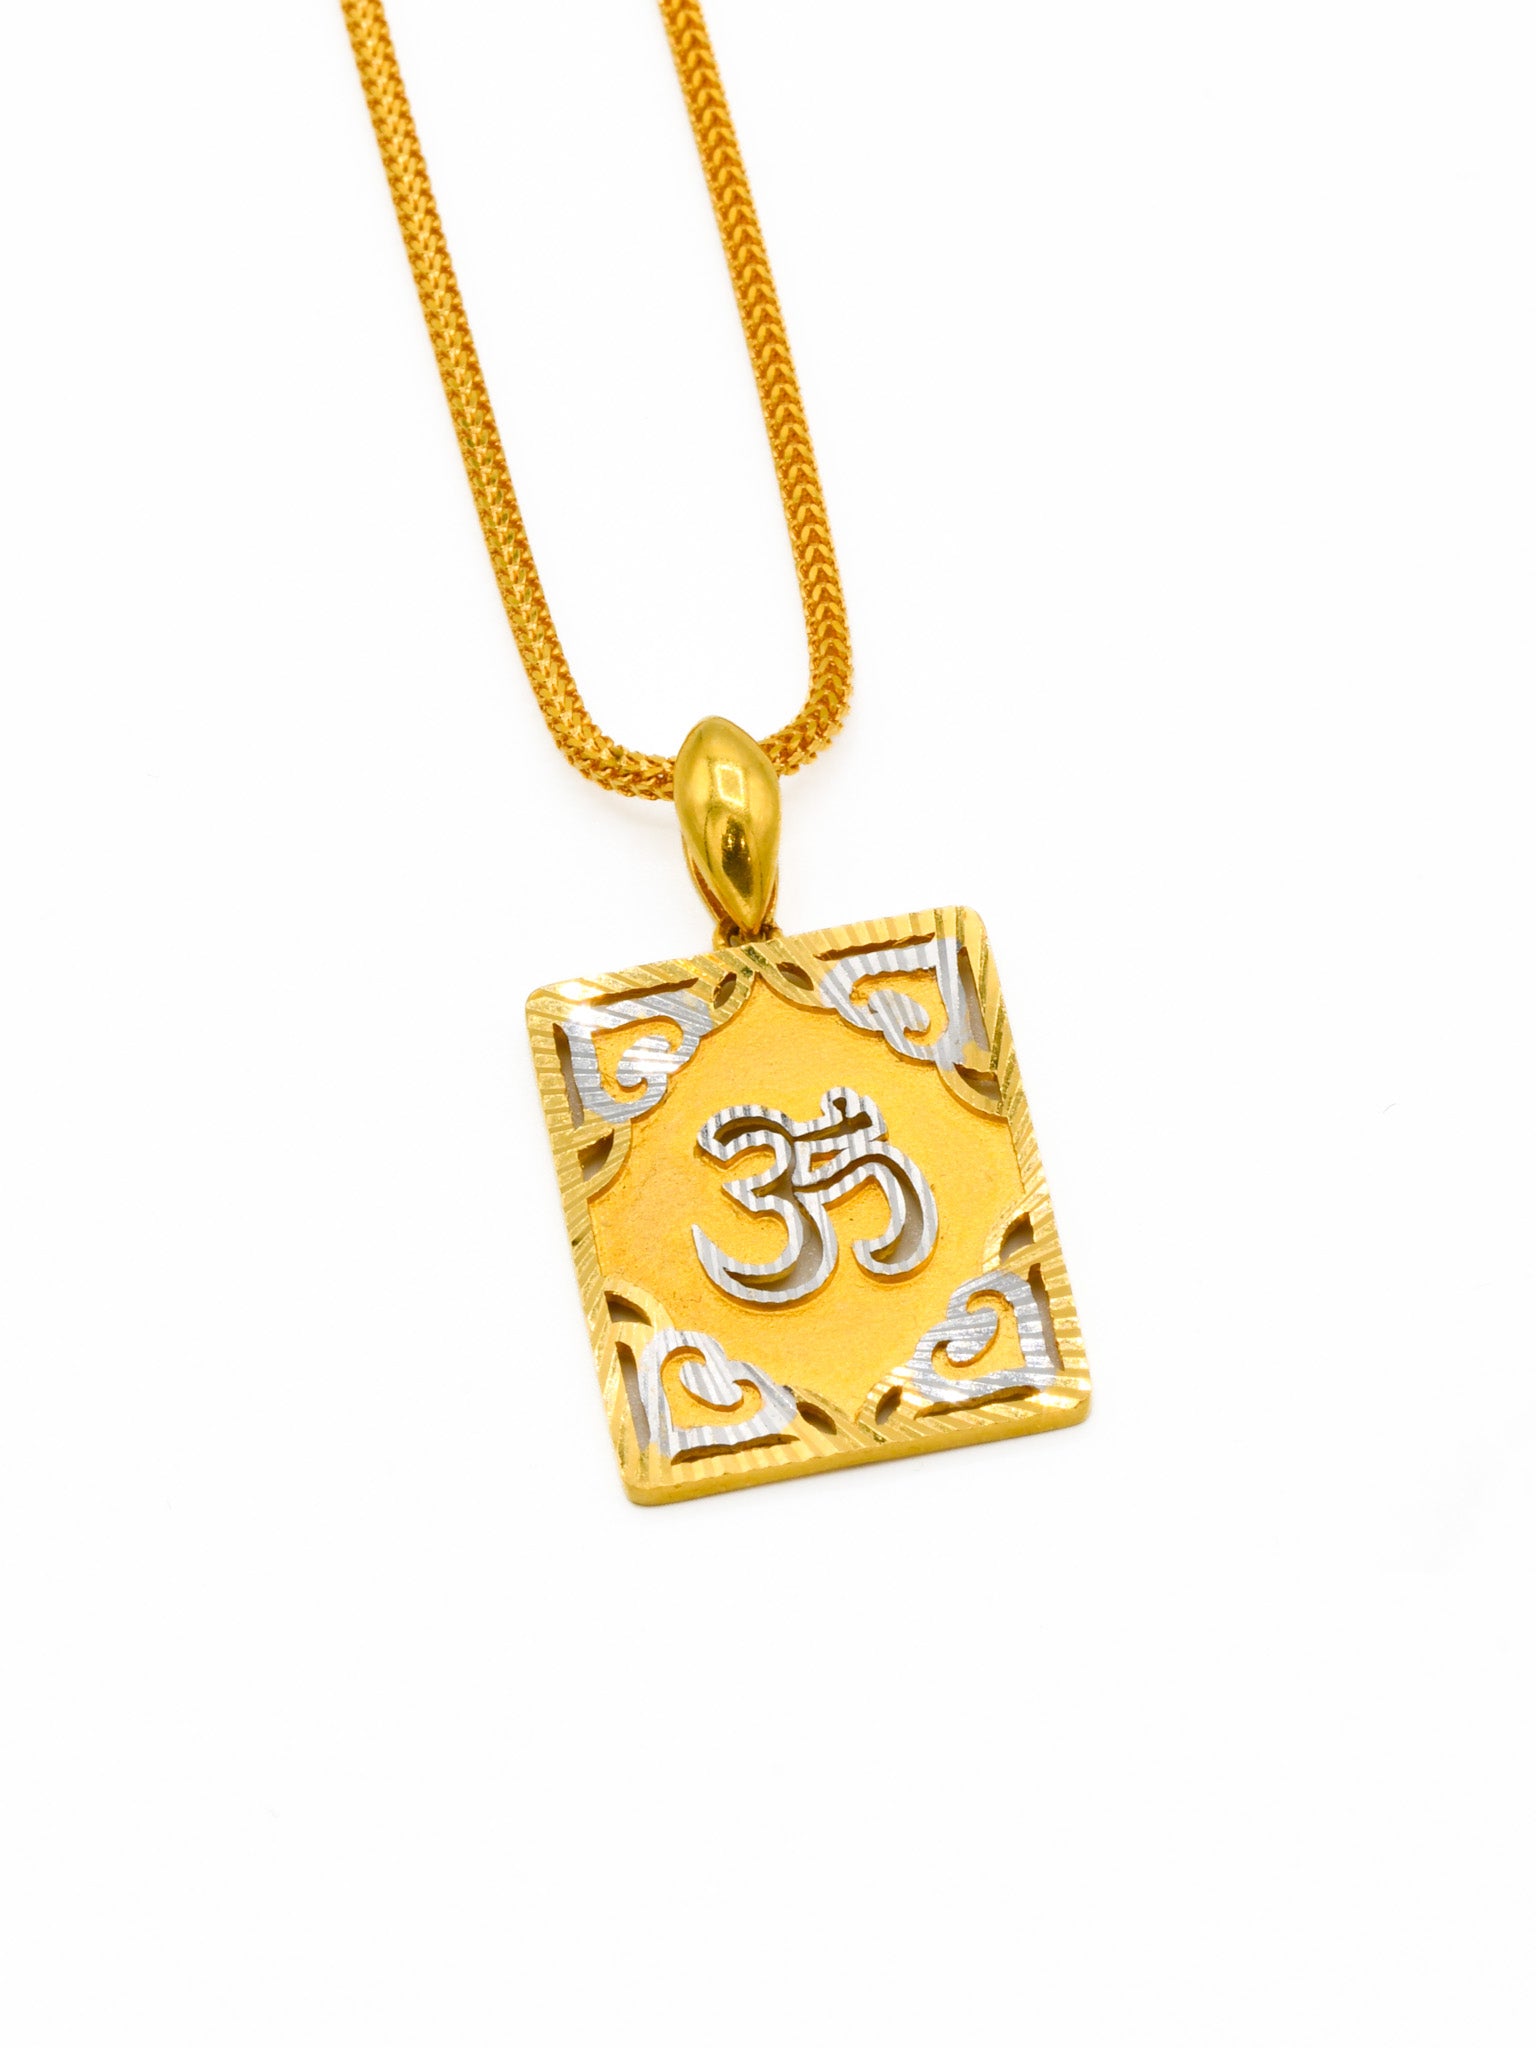 22ct Gold Two Tone Om Pendant - Roop Darshan